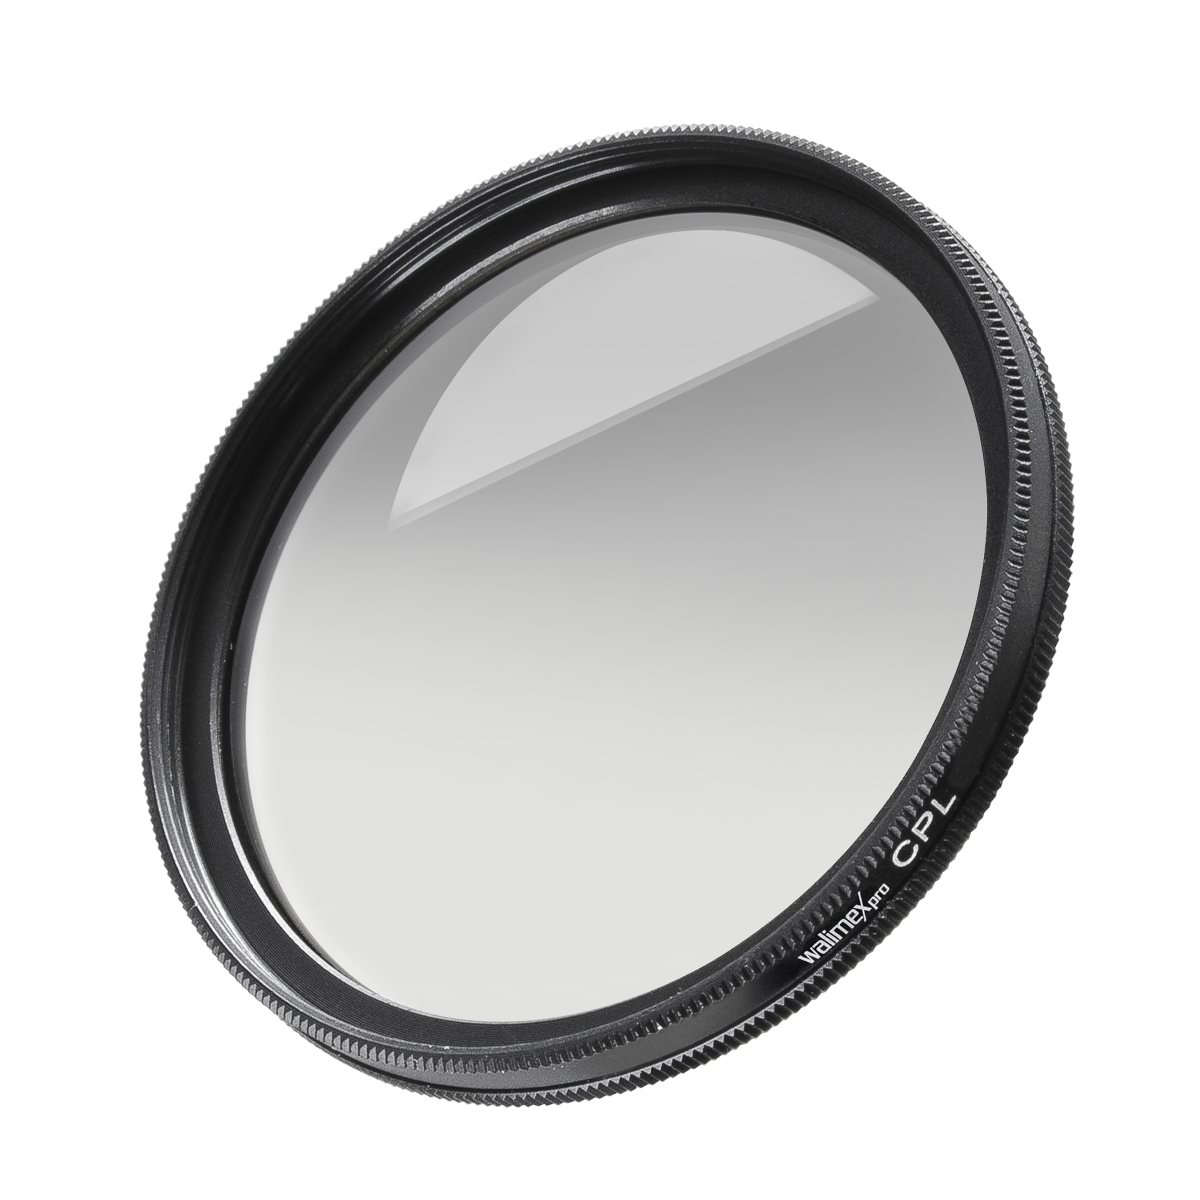 Walimex pro MC CPL filter coated 72 mm